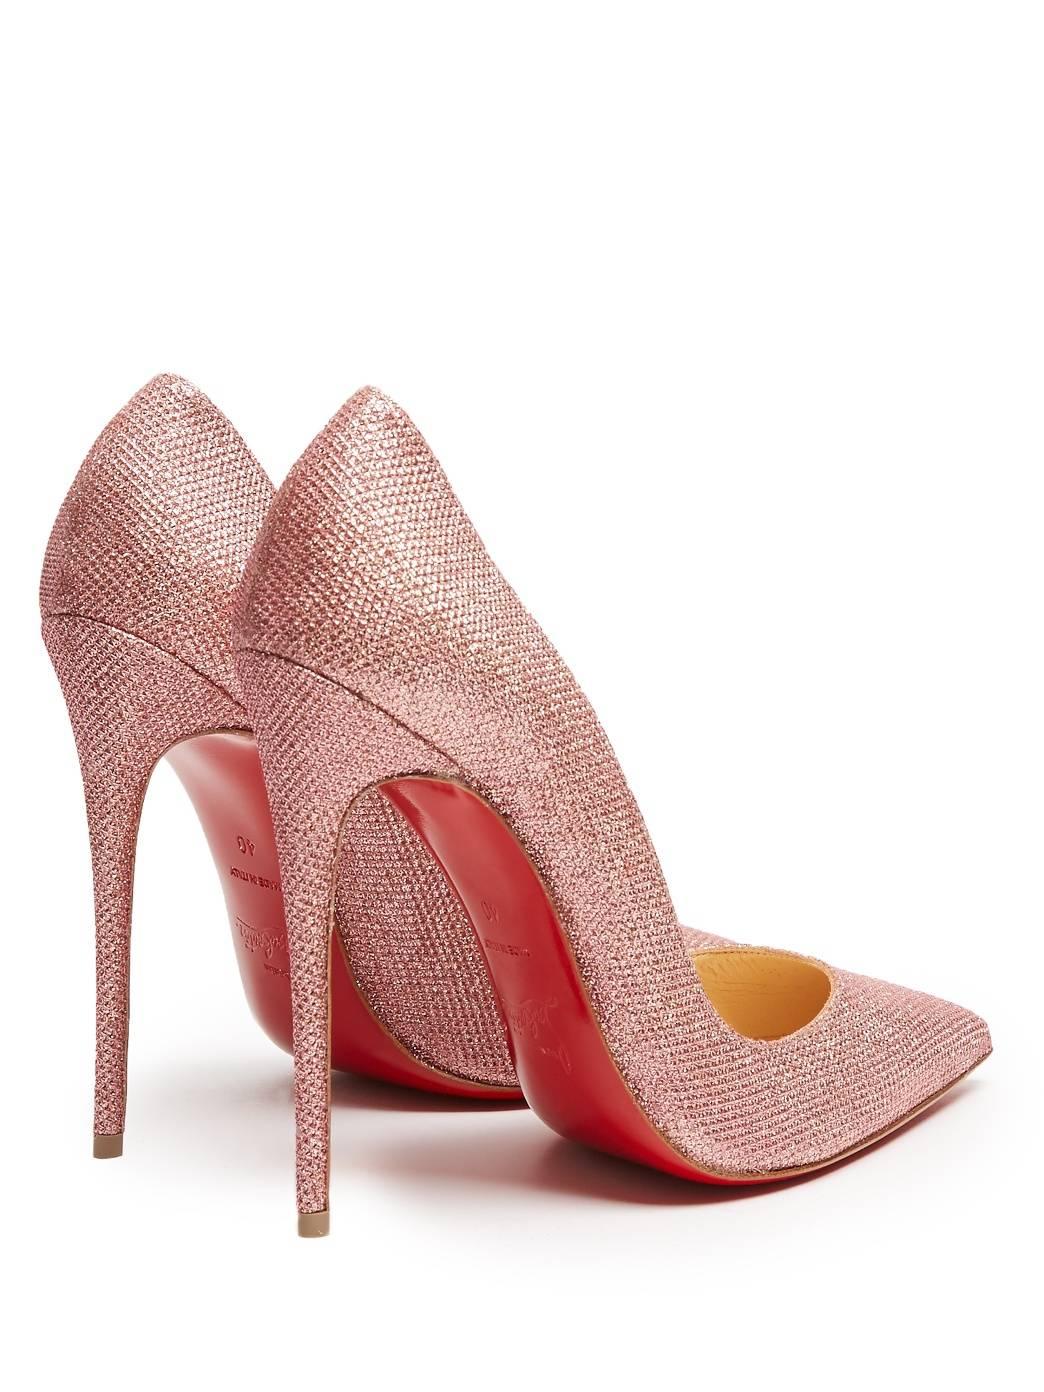 Women's Christian Louboutin New Pink Canvas So Kate Evening High Heels Pumps in Box